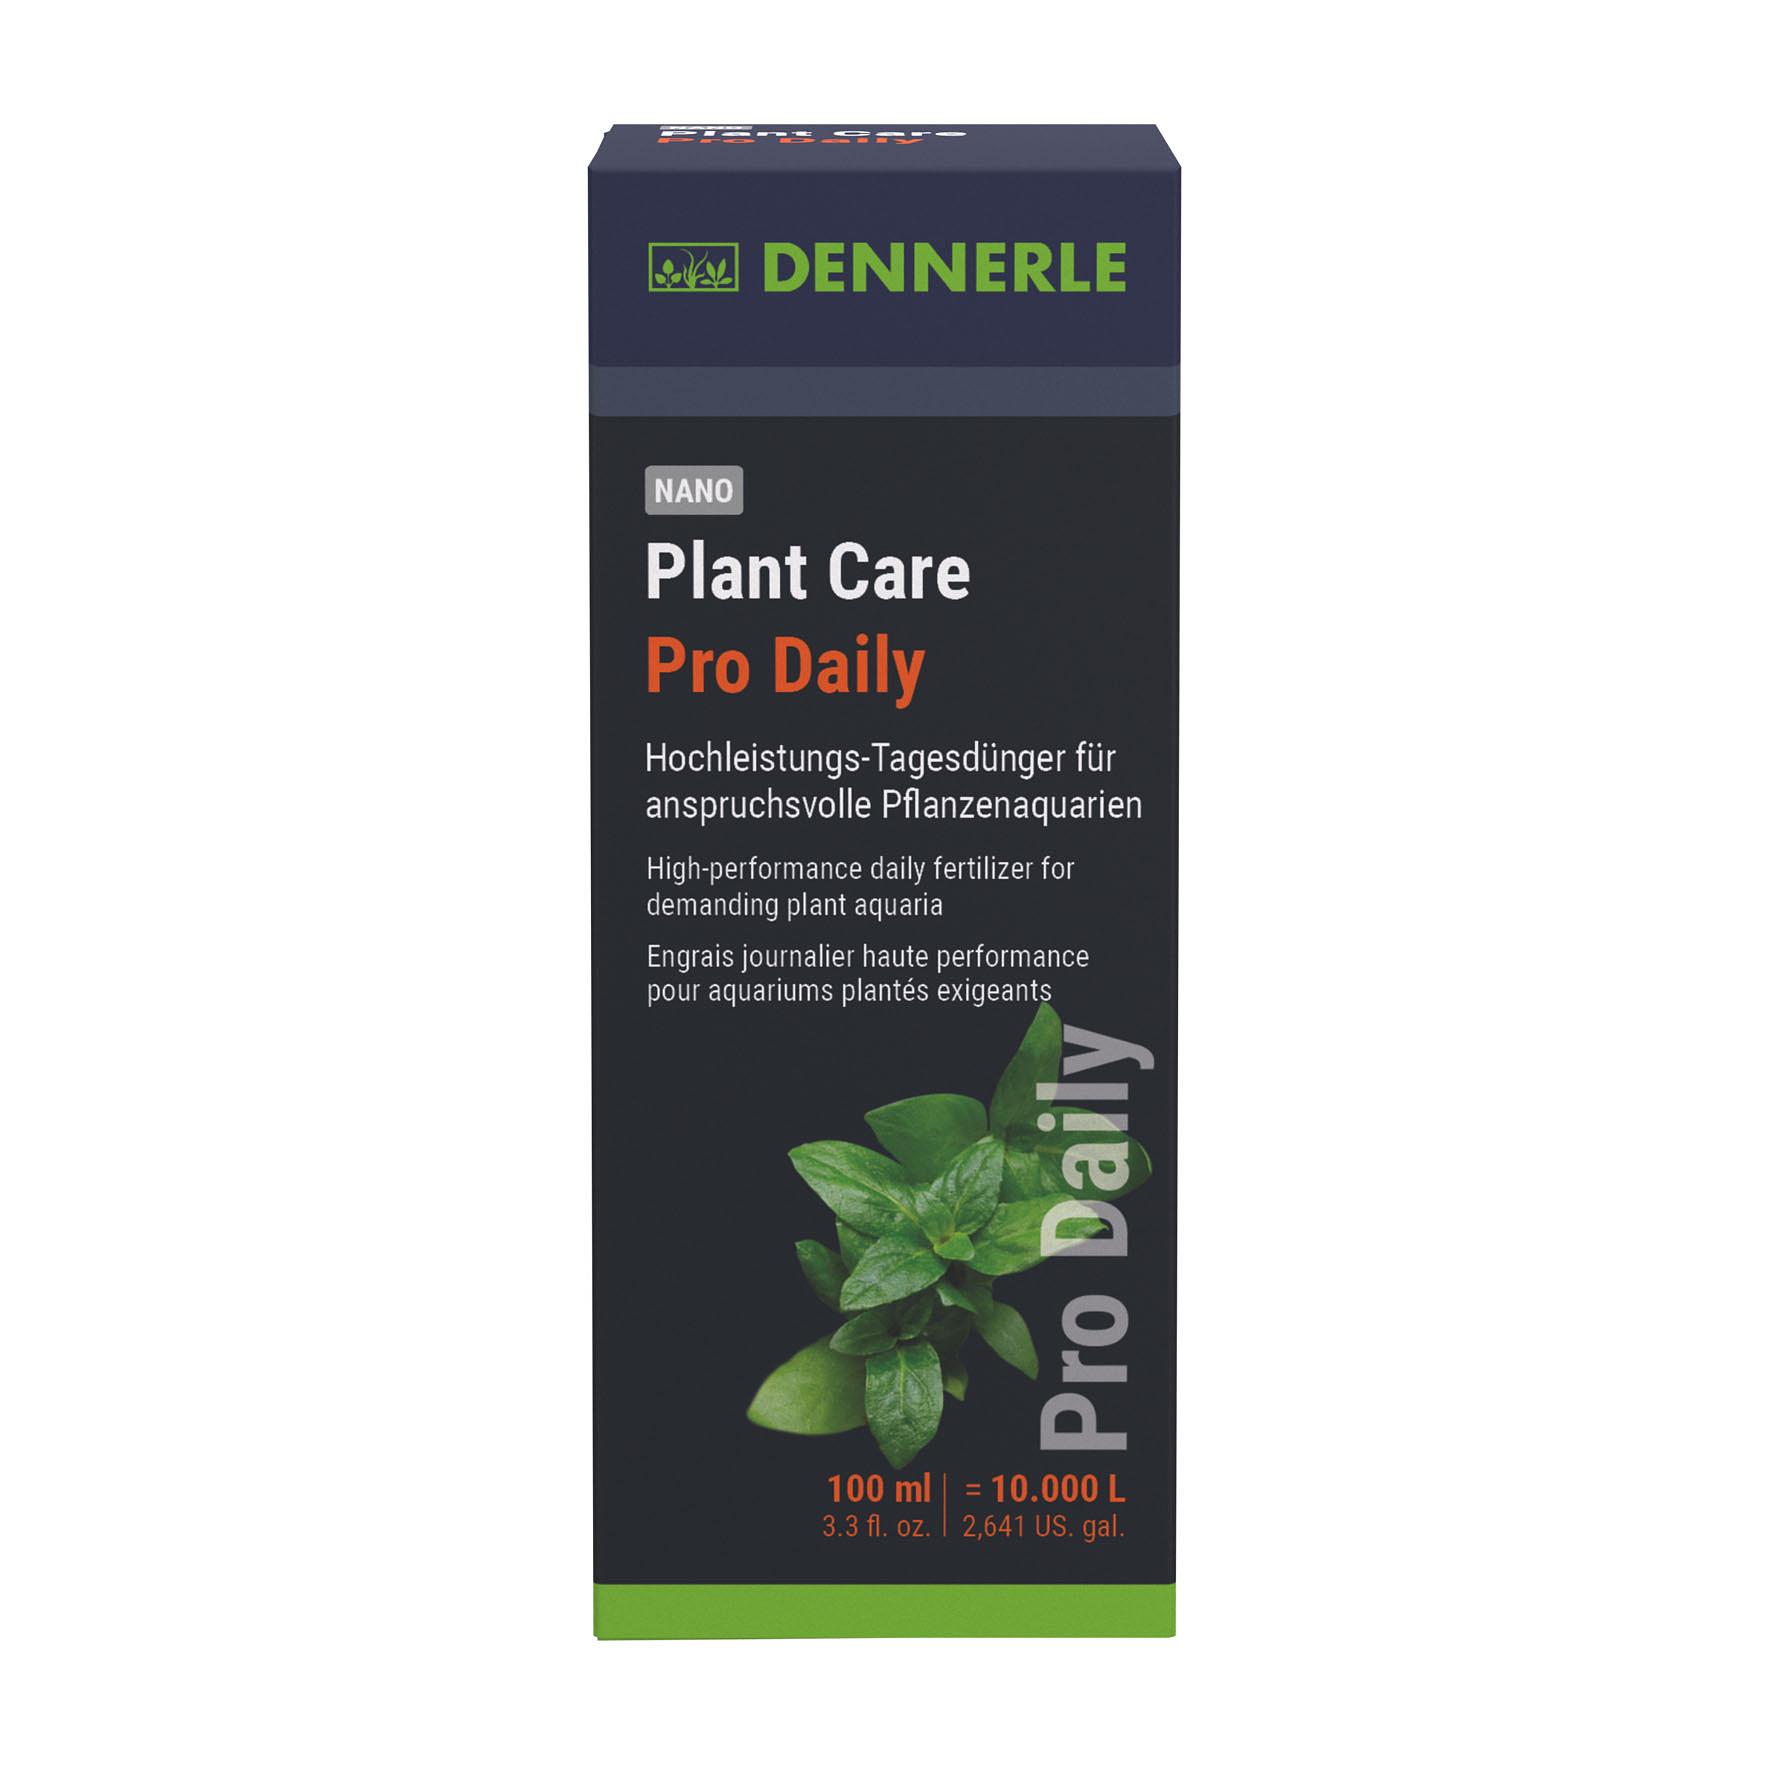 Dennerle Planta Care Pro Daily, 100ml